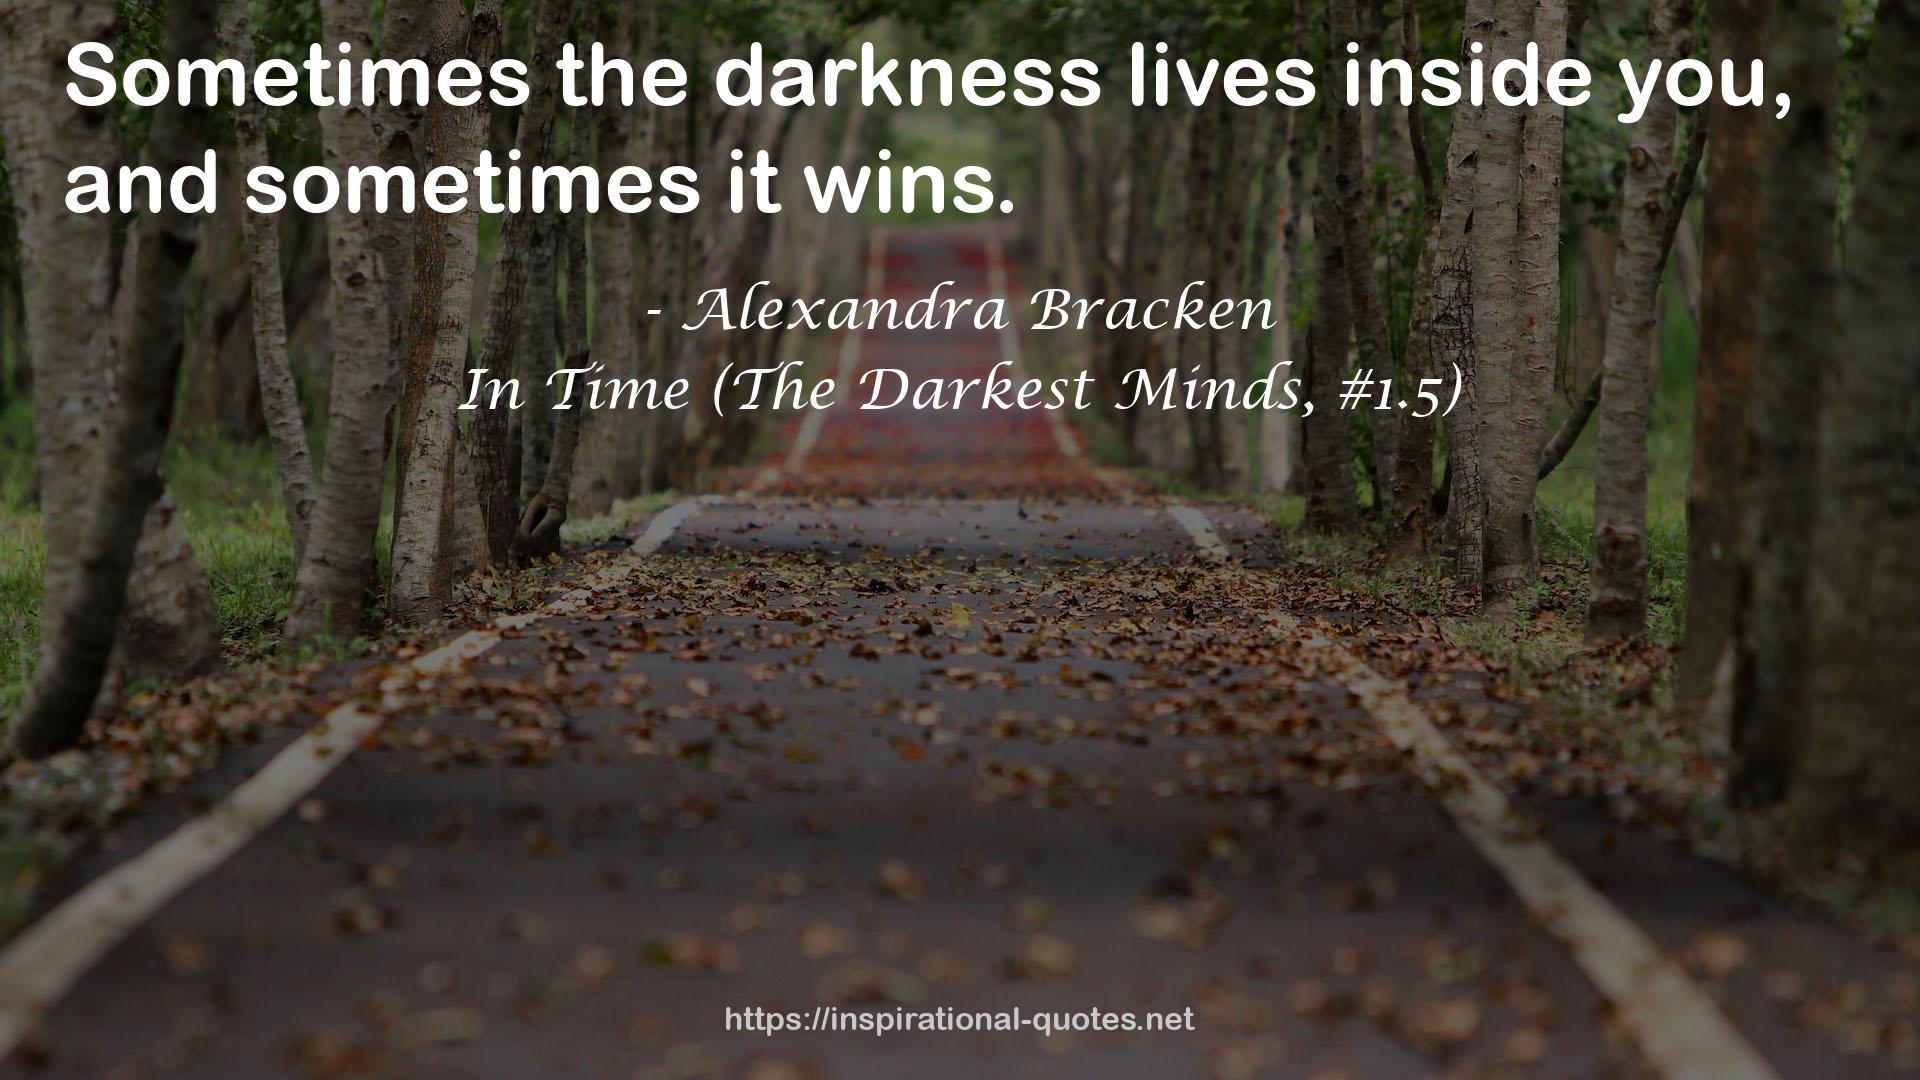 In Time (The Darkest Minds, #1.5) QUOTES